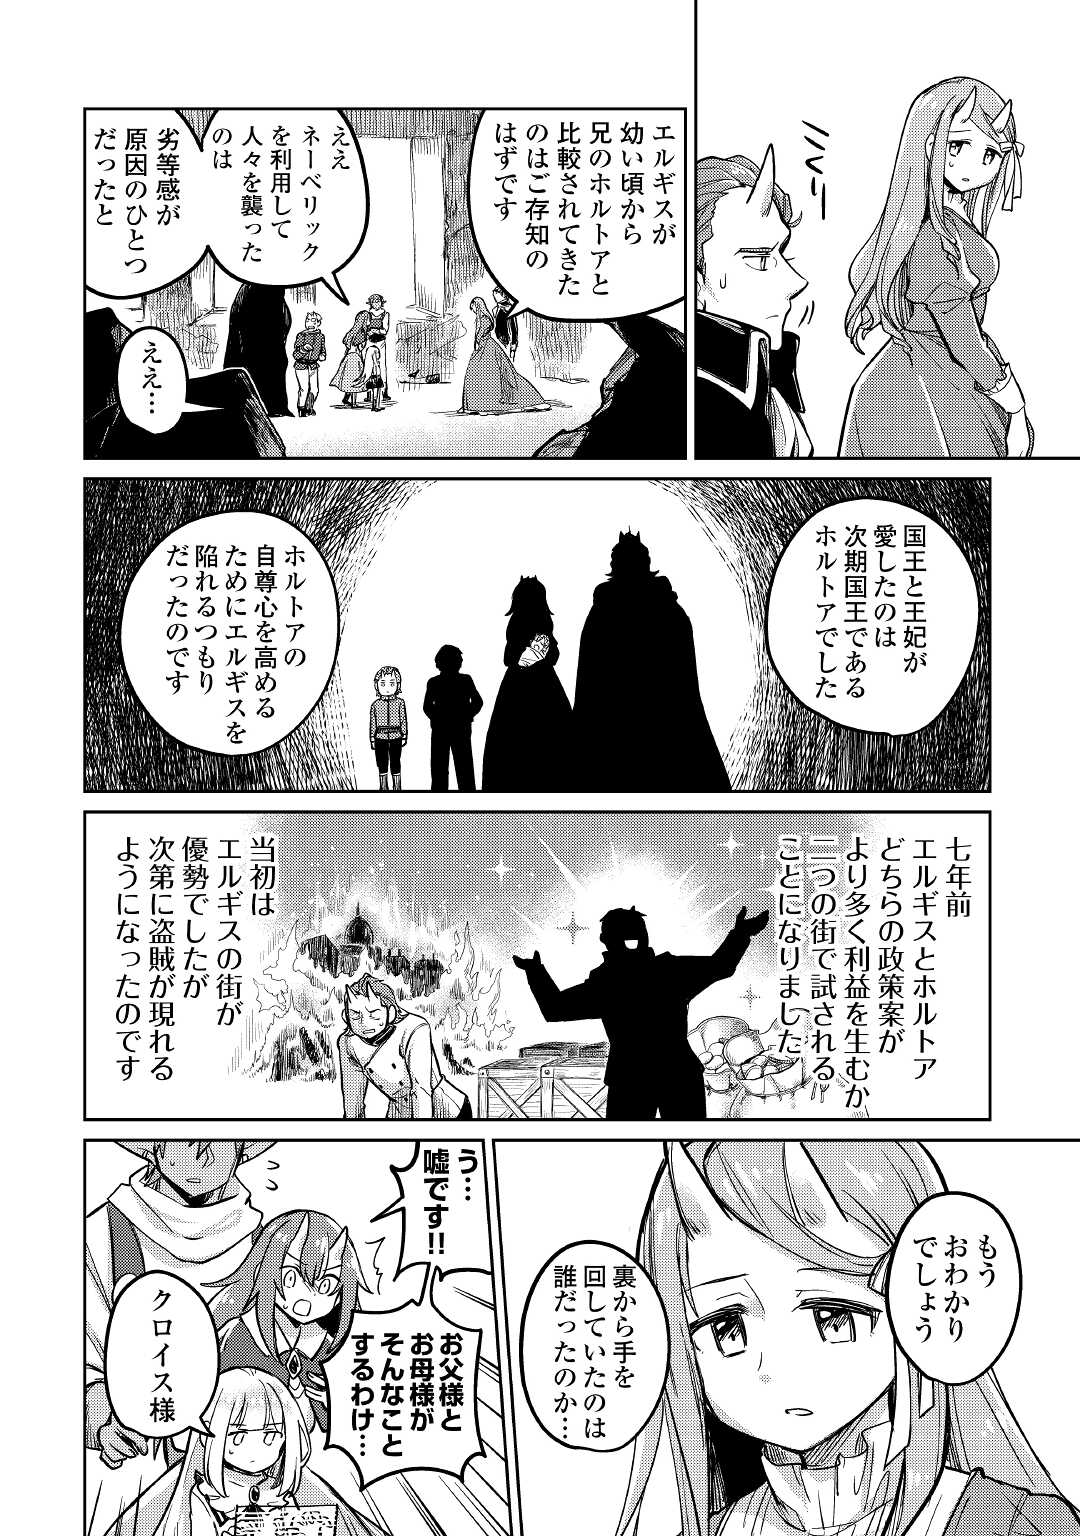 The Former Structural Researcher’s Story of Otherworldly Adventure 第40話 - Page 12